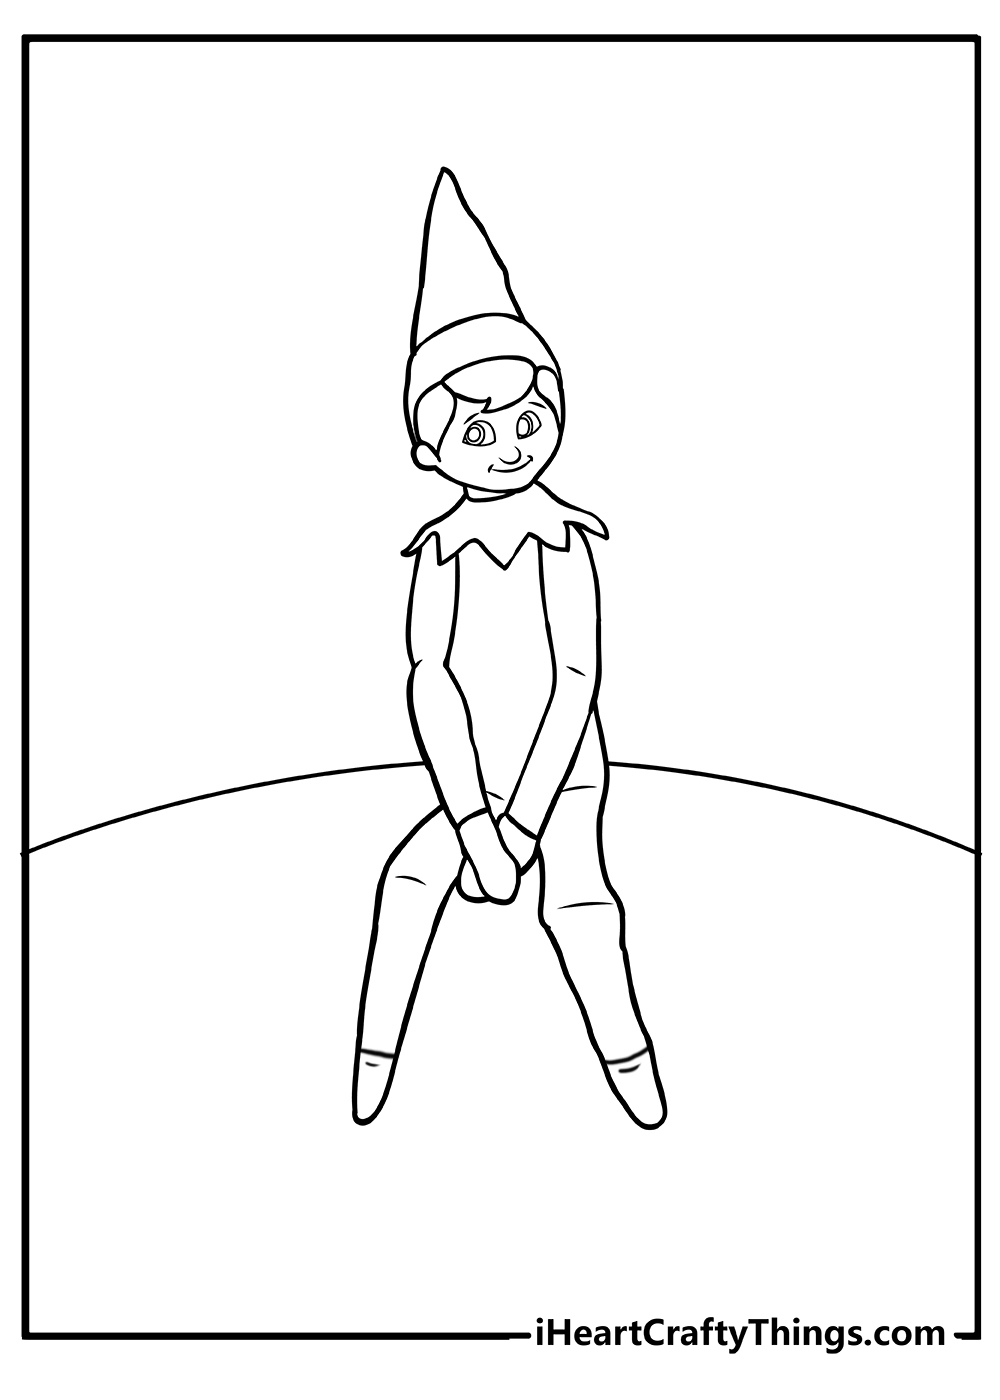 Elf on the Shelf Coloring Pages for adults free